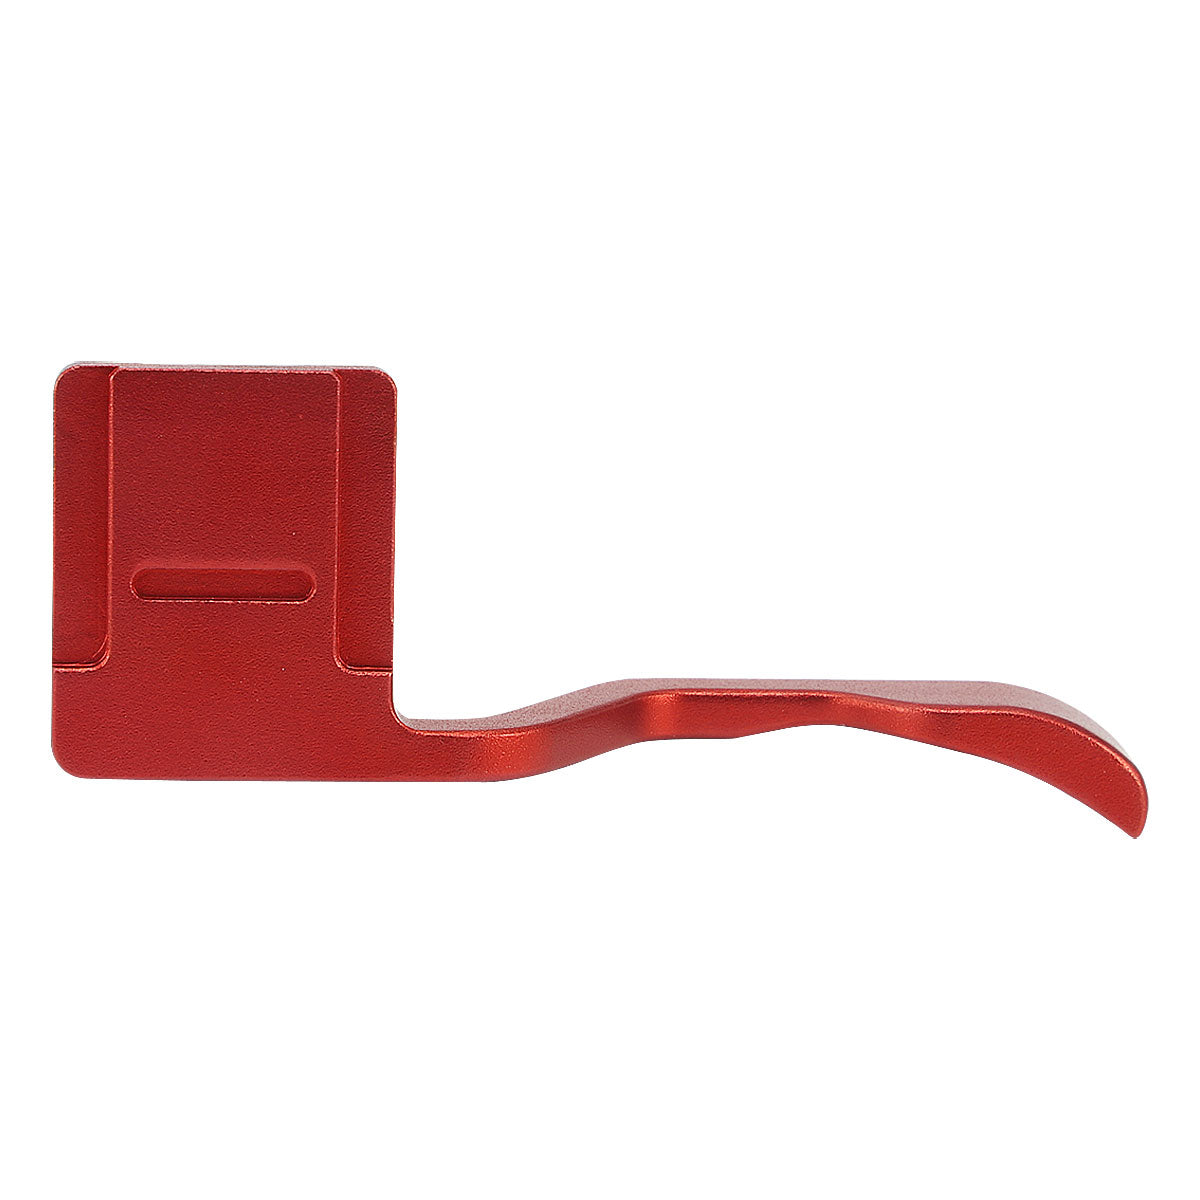 Haoge THB-XT30R Metal Hot Shoe Thumb Up Rest Hand Grip for Fujifilm Fuji X-T10 X-T20 X-T30 XT10 XT20 XT30 Camera Red